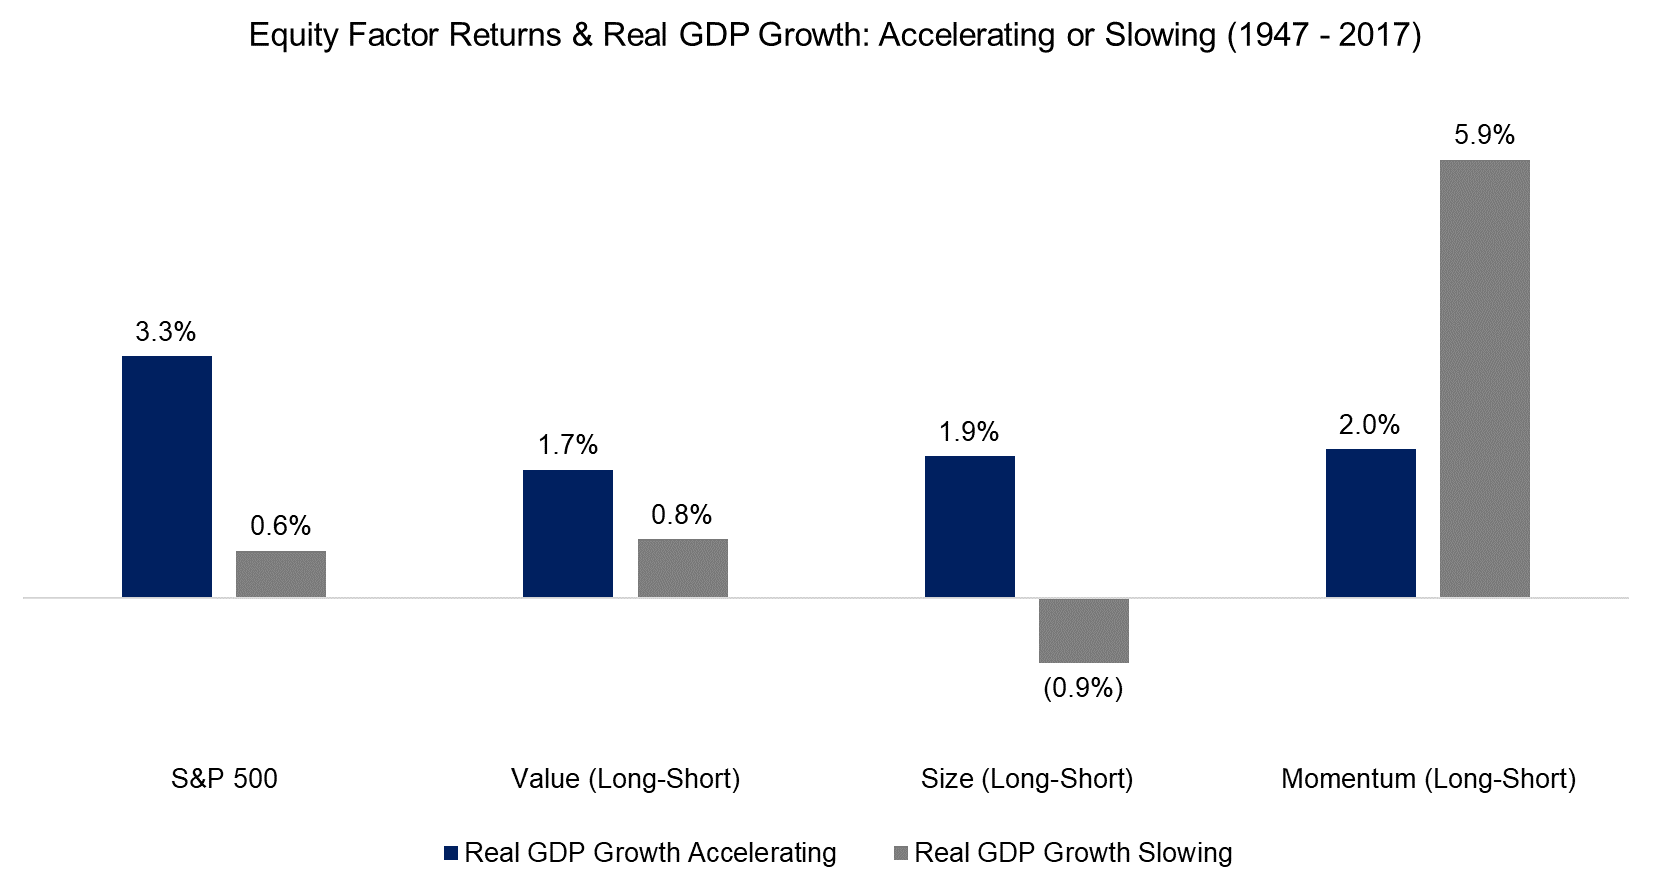 Equity Factor Returns & Real GDP Growth Accelerating or Slowing (1947 - 2017)